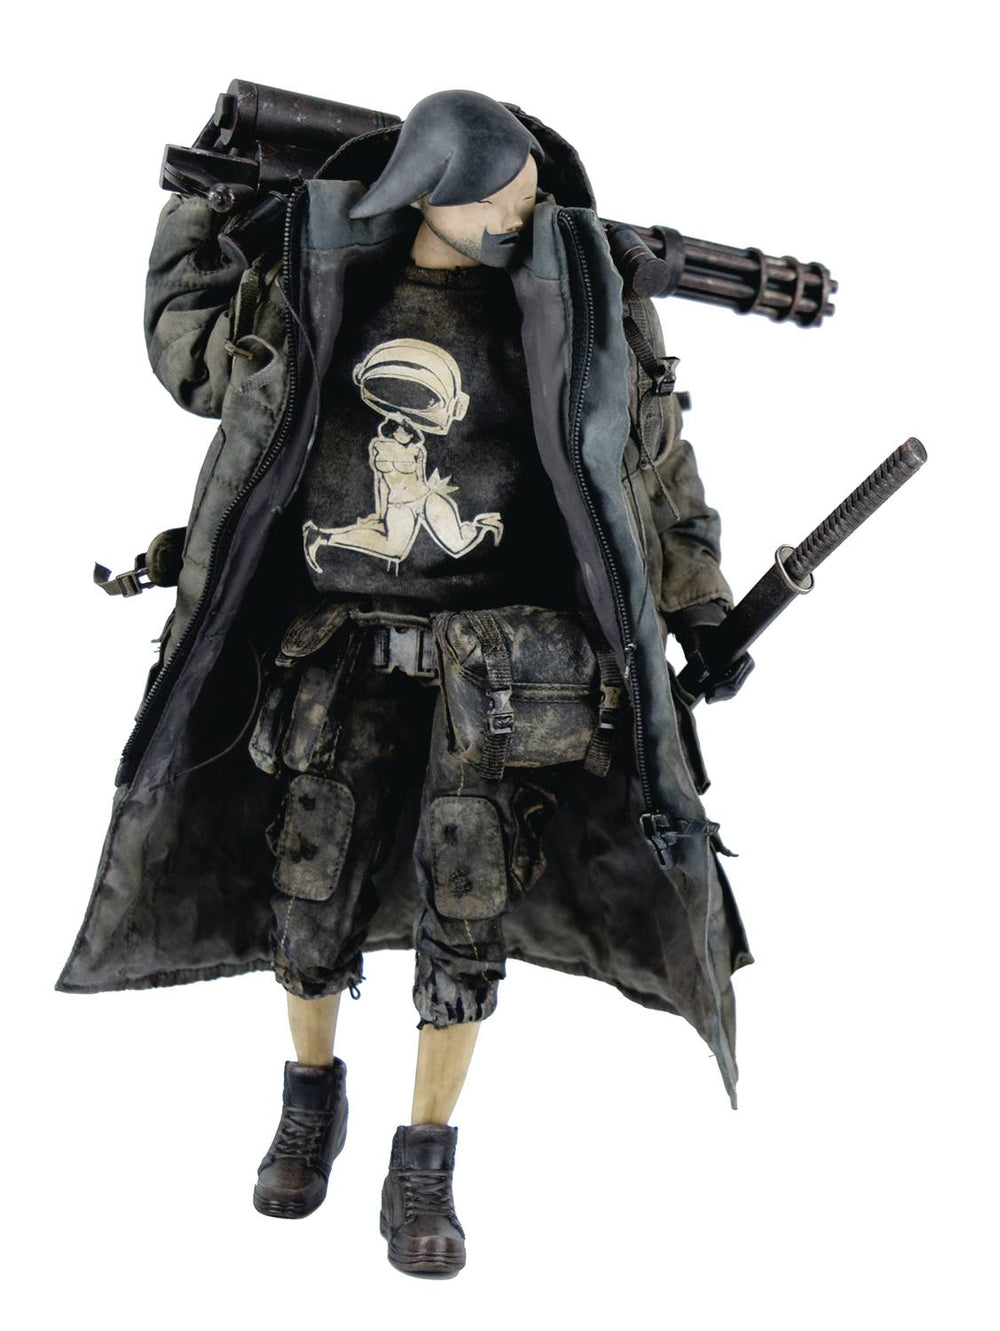 ULTRA TK LAST STAND YAMA 1/6 SCALE FIG ONLINE EDITION ACTION FIGURE